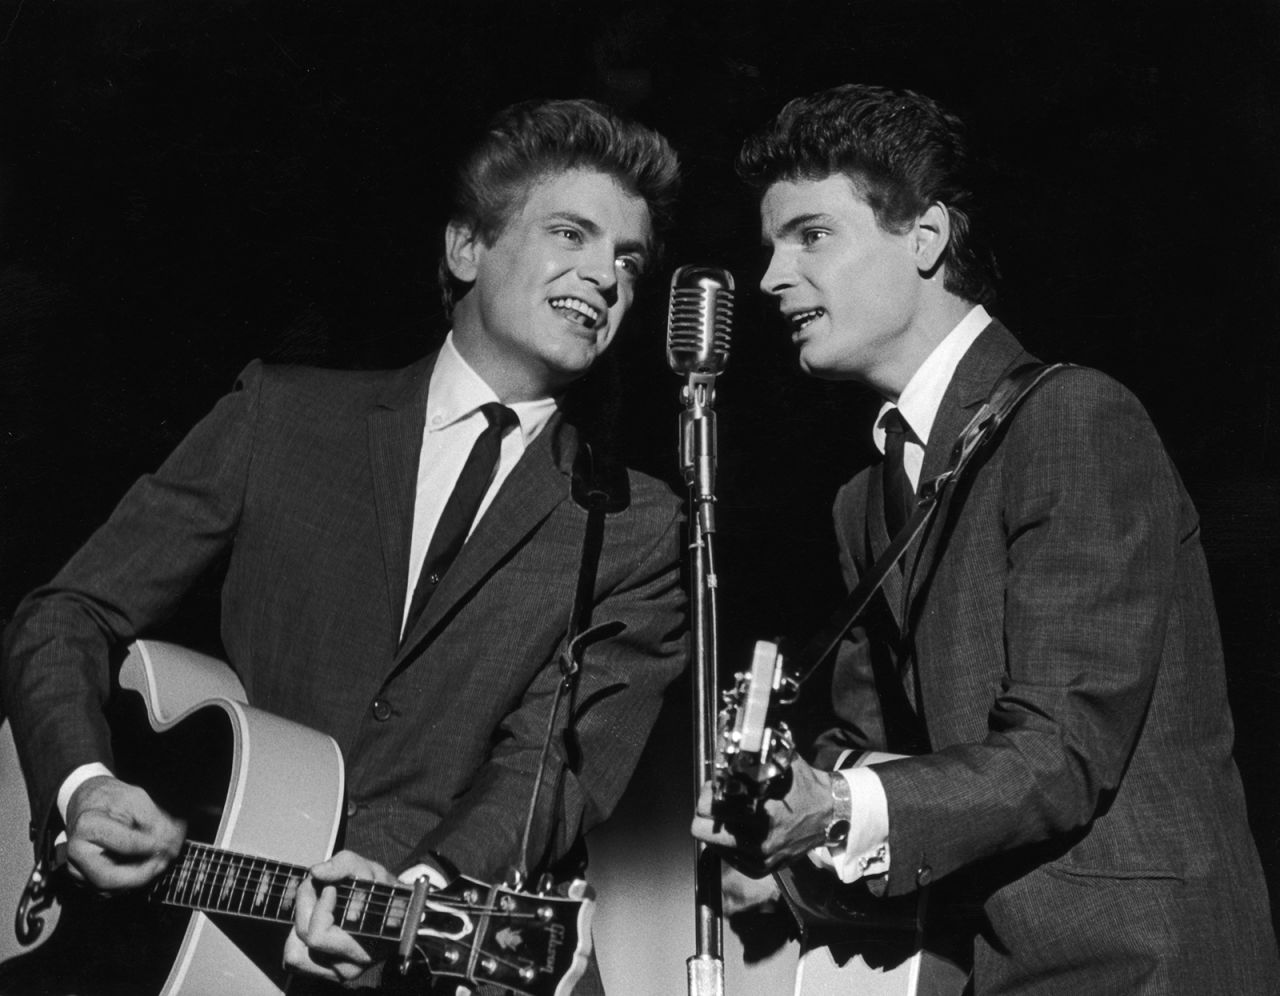 <a href="https://www.cnn.com/2021/08/23/entertainment/don-everly-death-obit/index.html" target="_blank">Don Everly,</a> the last of the silken-voiced Everly Brothers music duo, died August 21 at the age of 84. He's on the right here performing with his younger brother, Phil, in 1962. The two became pop idols in the late 1950s with chart-topping hits such as "Bye Bye Love," "All I Have to Do is Dream" and "Wake Up Little Susie."